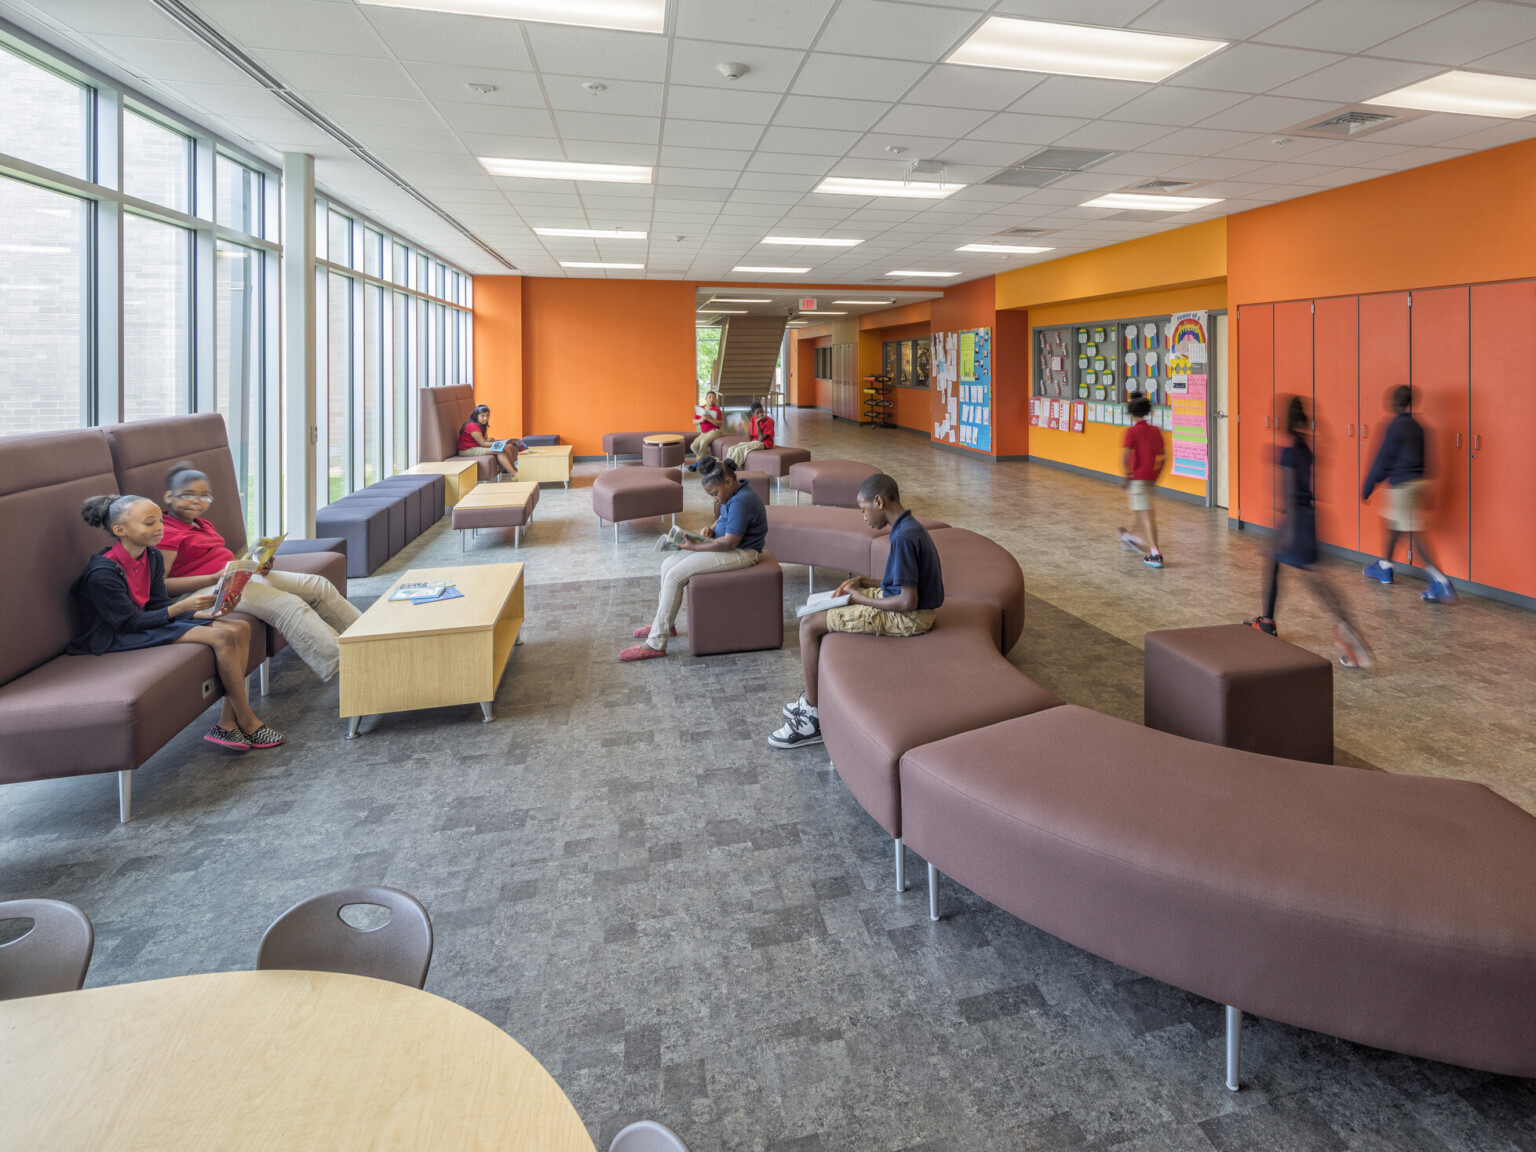 orange hallway in Boone Park Elementary School with mixed comfortable seating and floor to ceiling windows